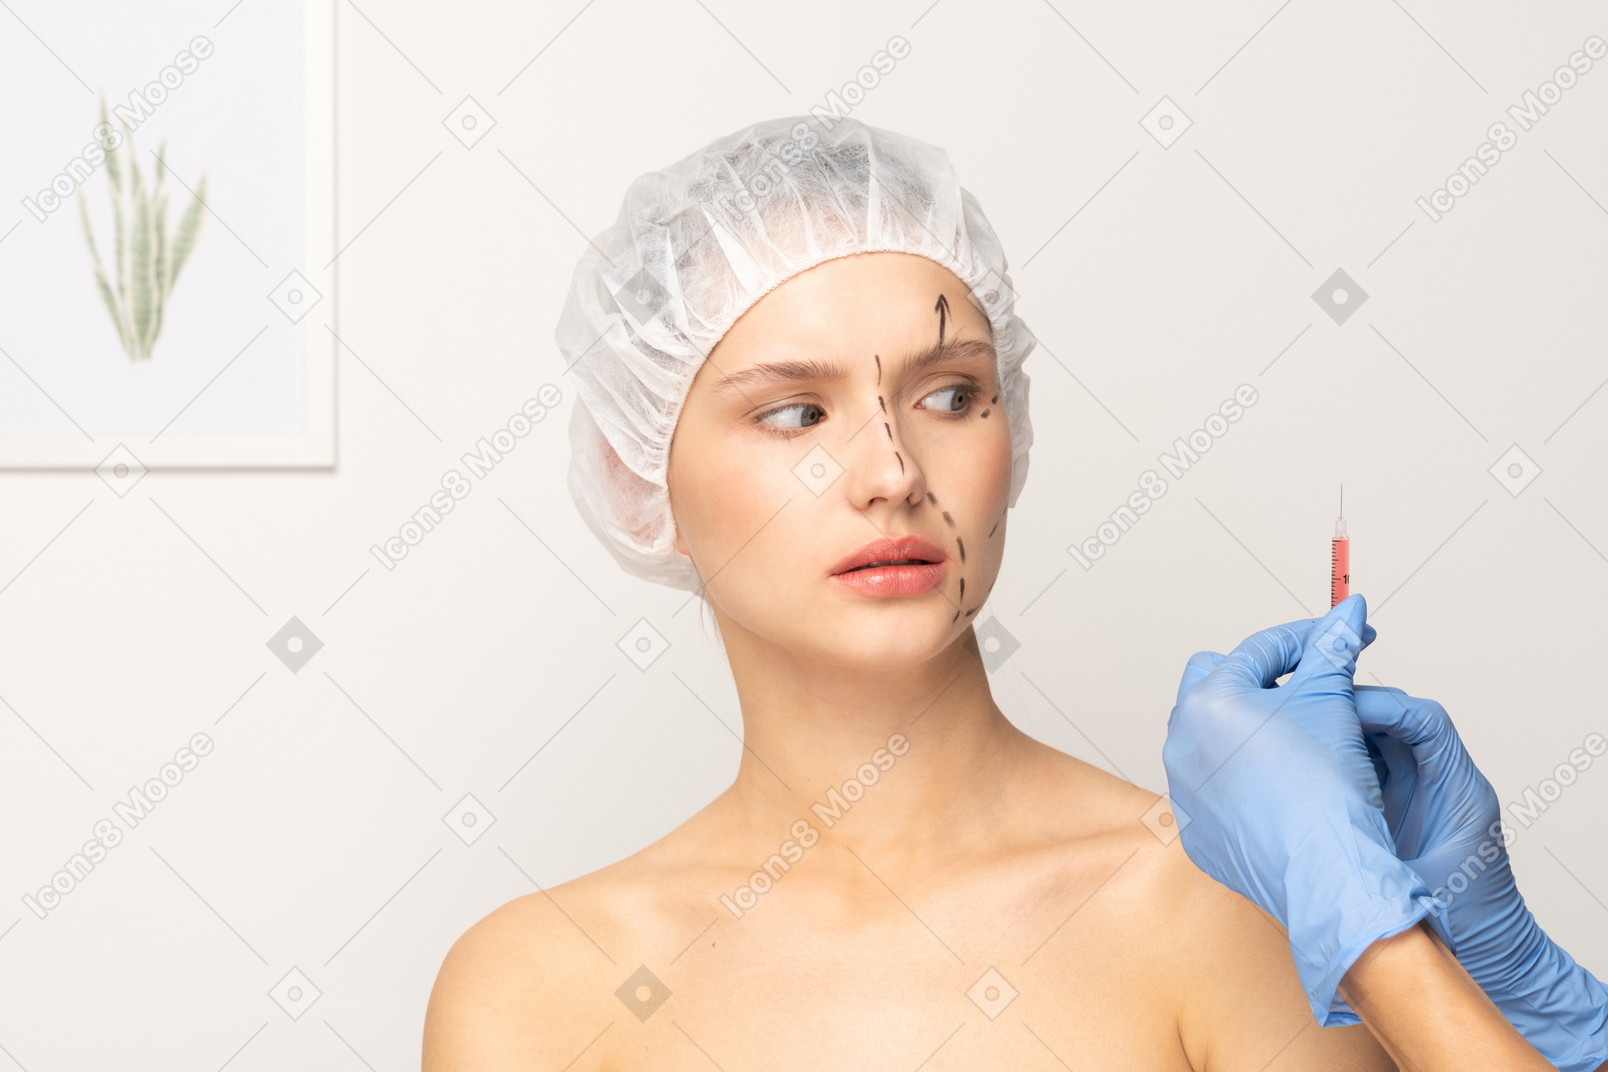 Young woman looking panicked before filler injection